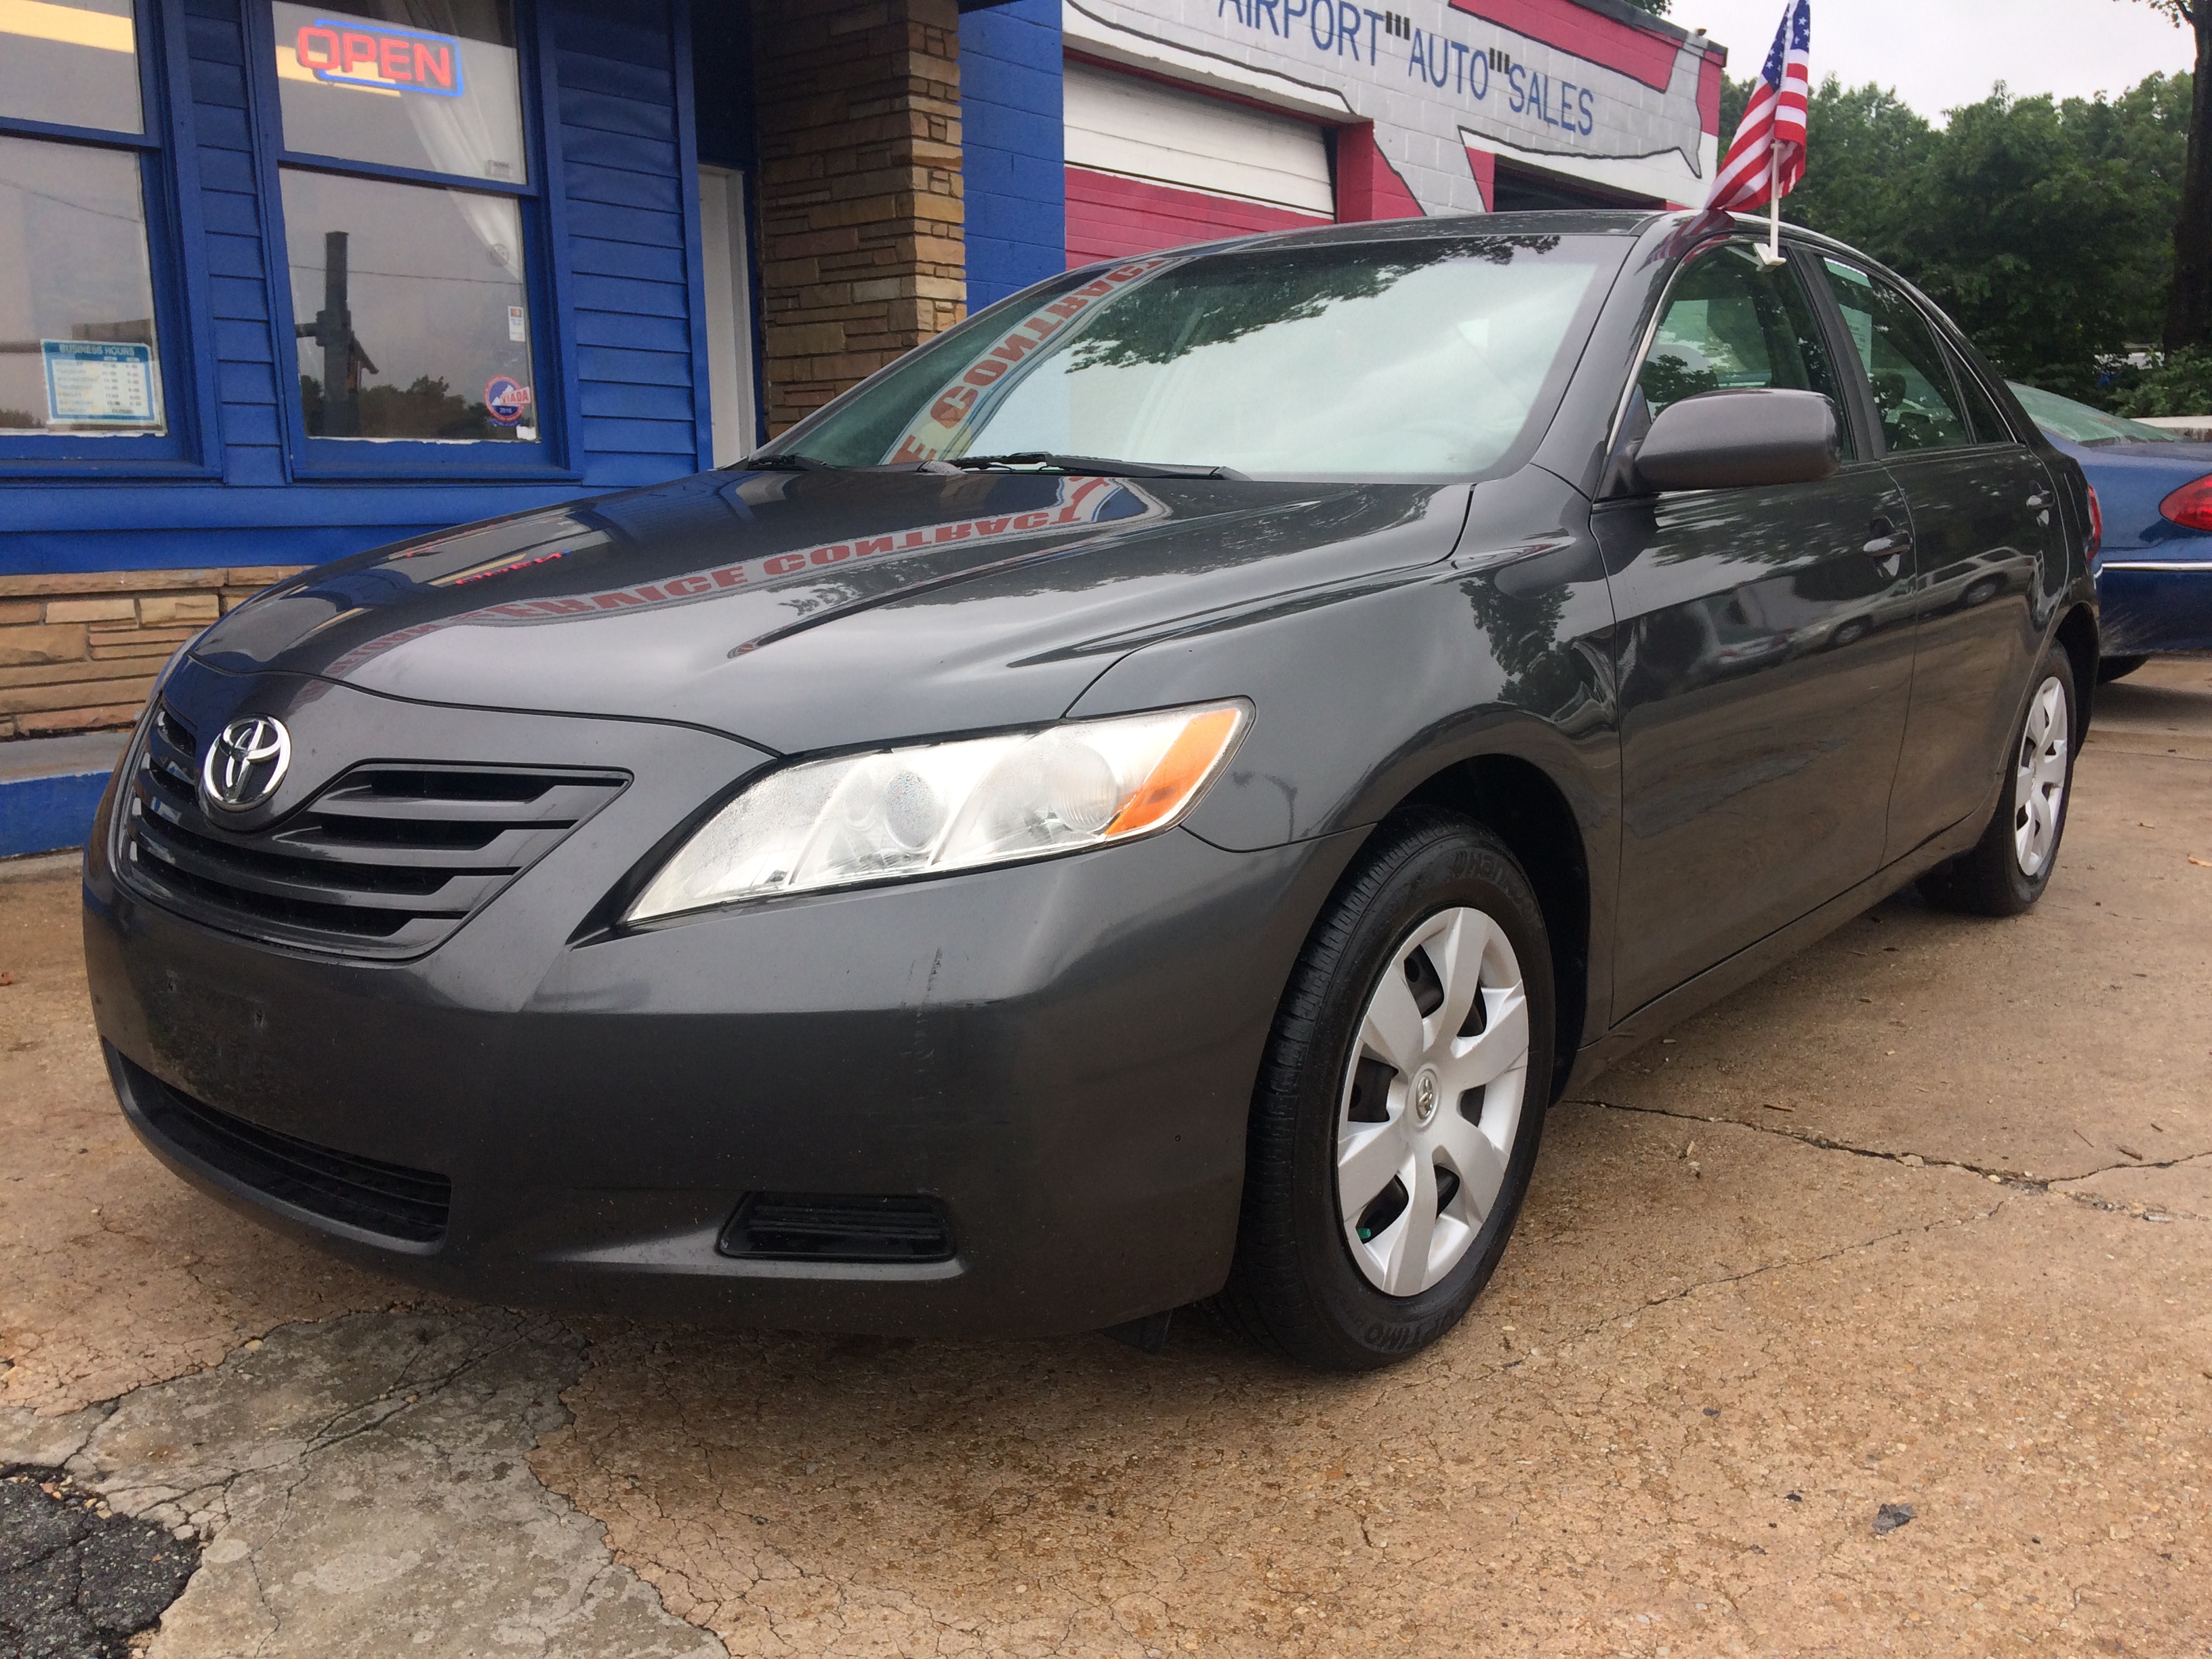 2007 Toyota Camry CE, Airport Auto Sales - Used Cars for Sale, VA.